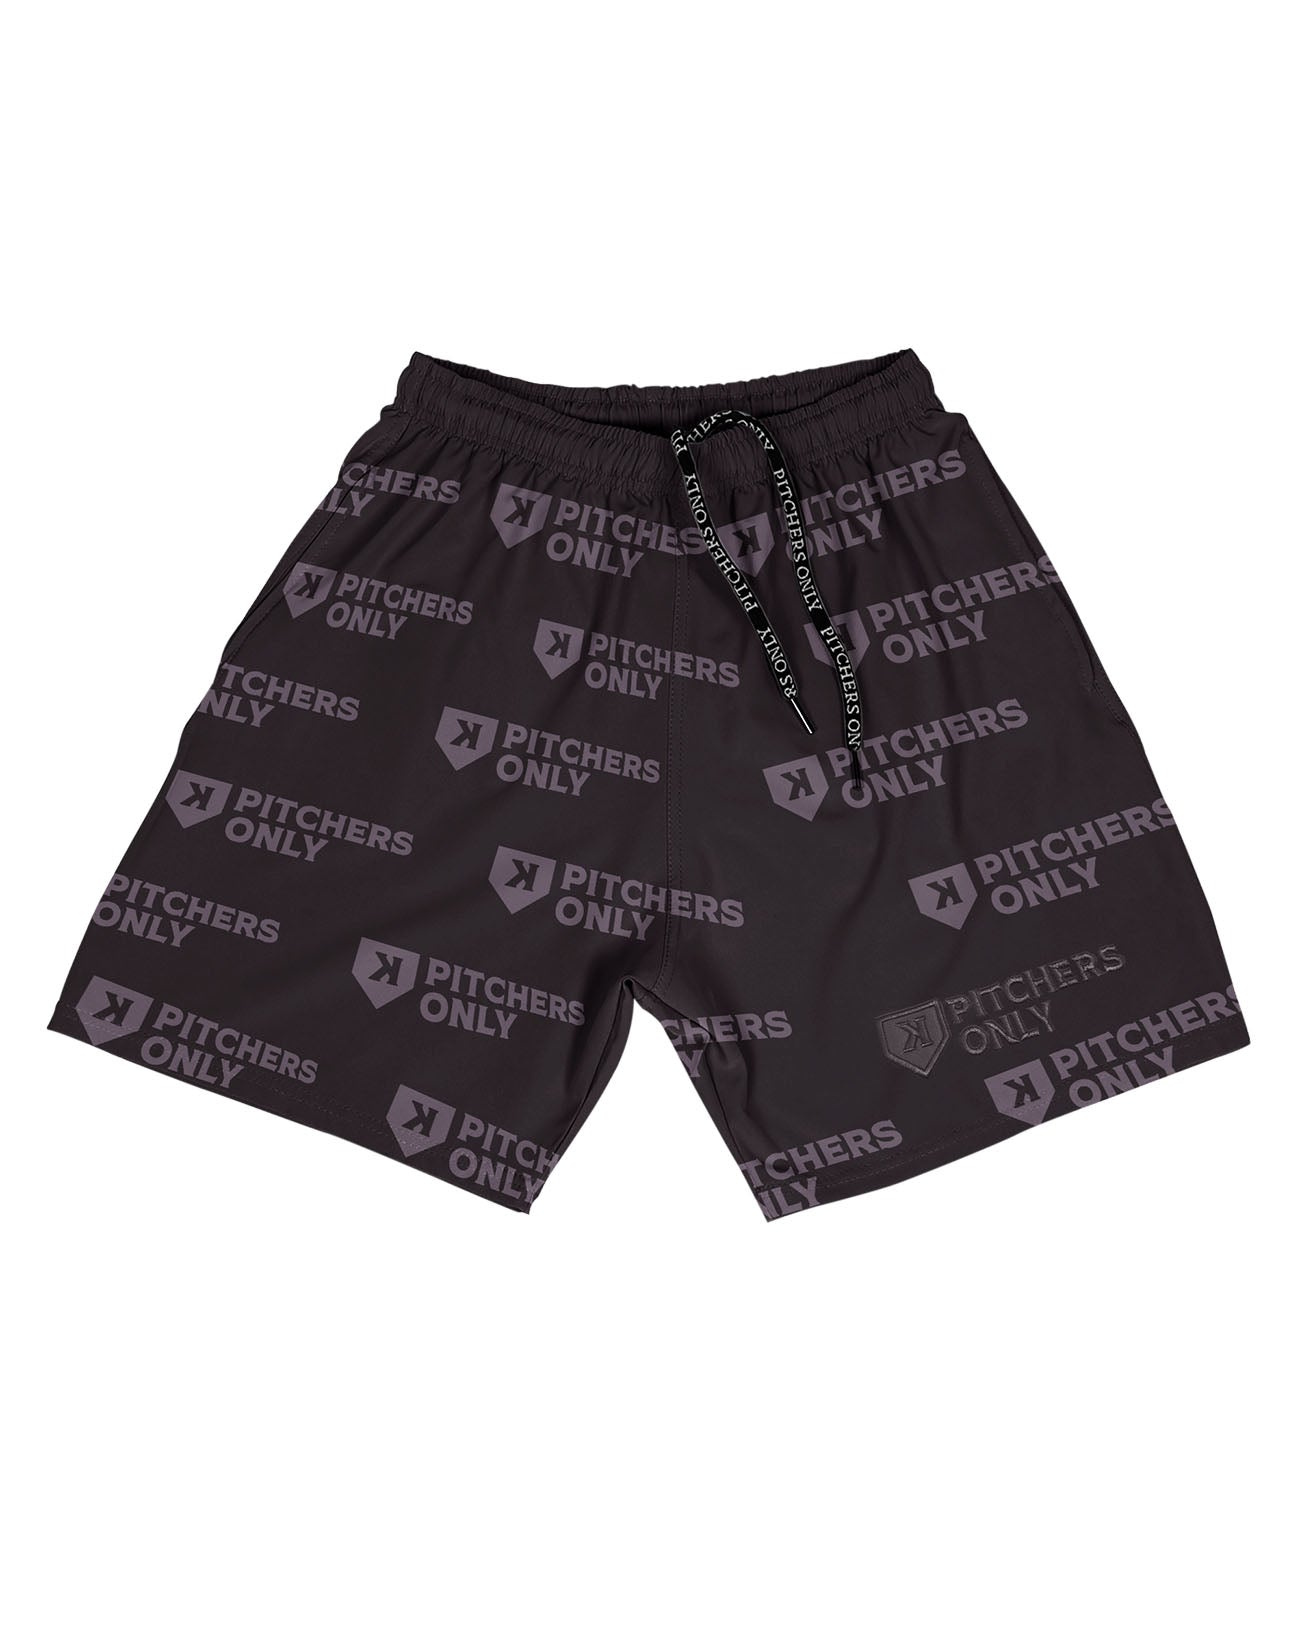 YOUTH Black All-Over Print Training Shorts